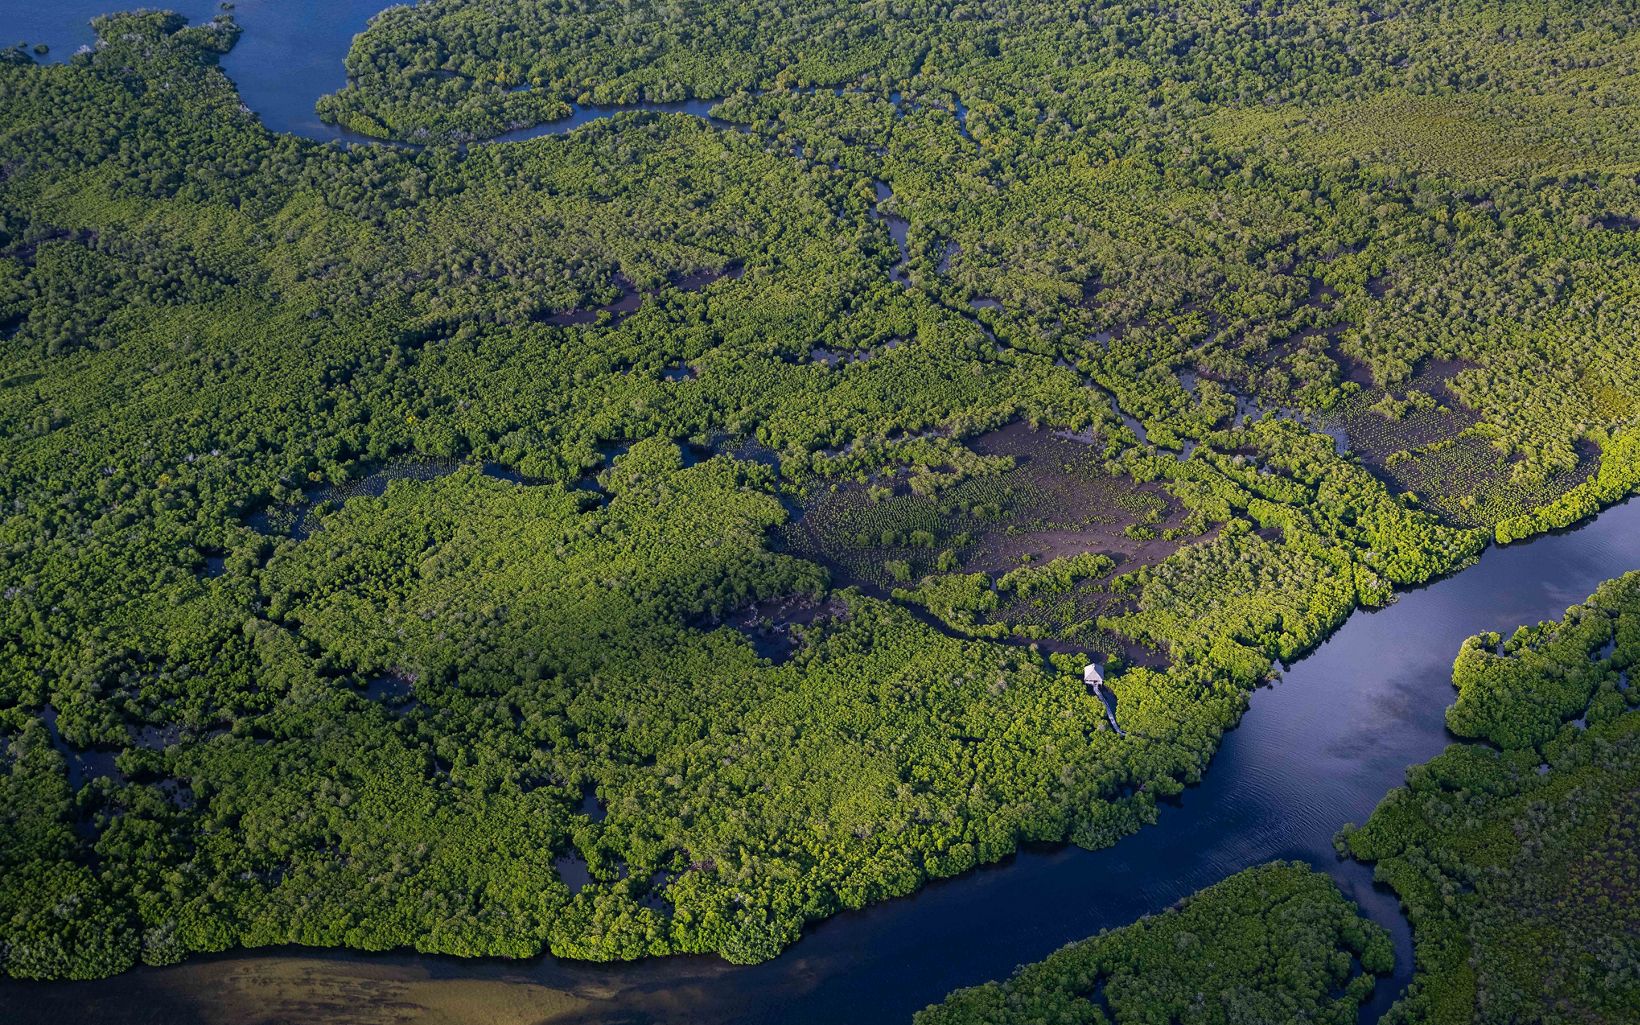 An aerial view of green mangrove forests